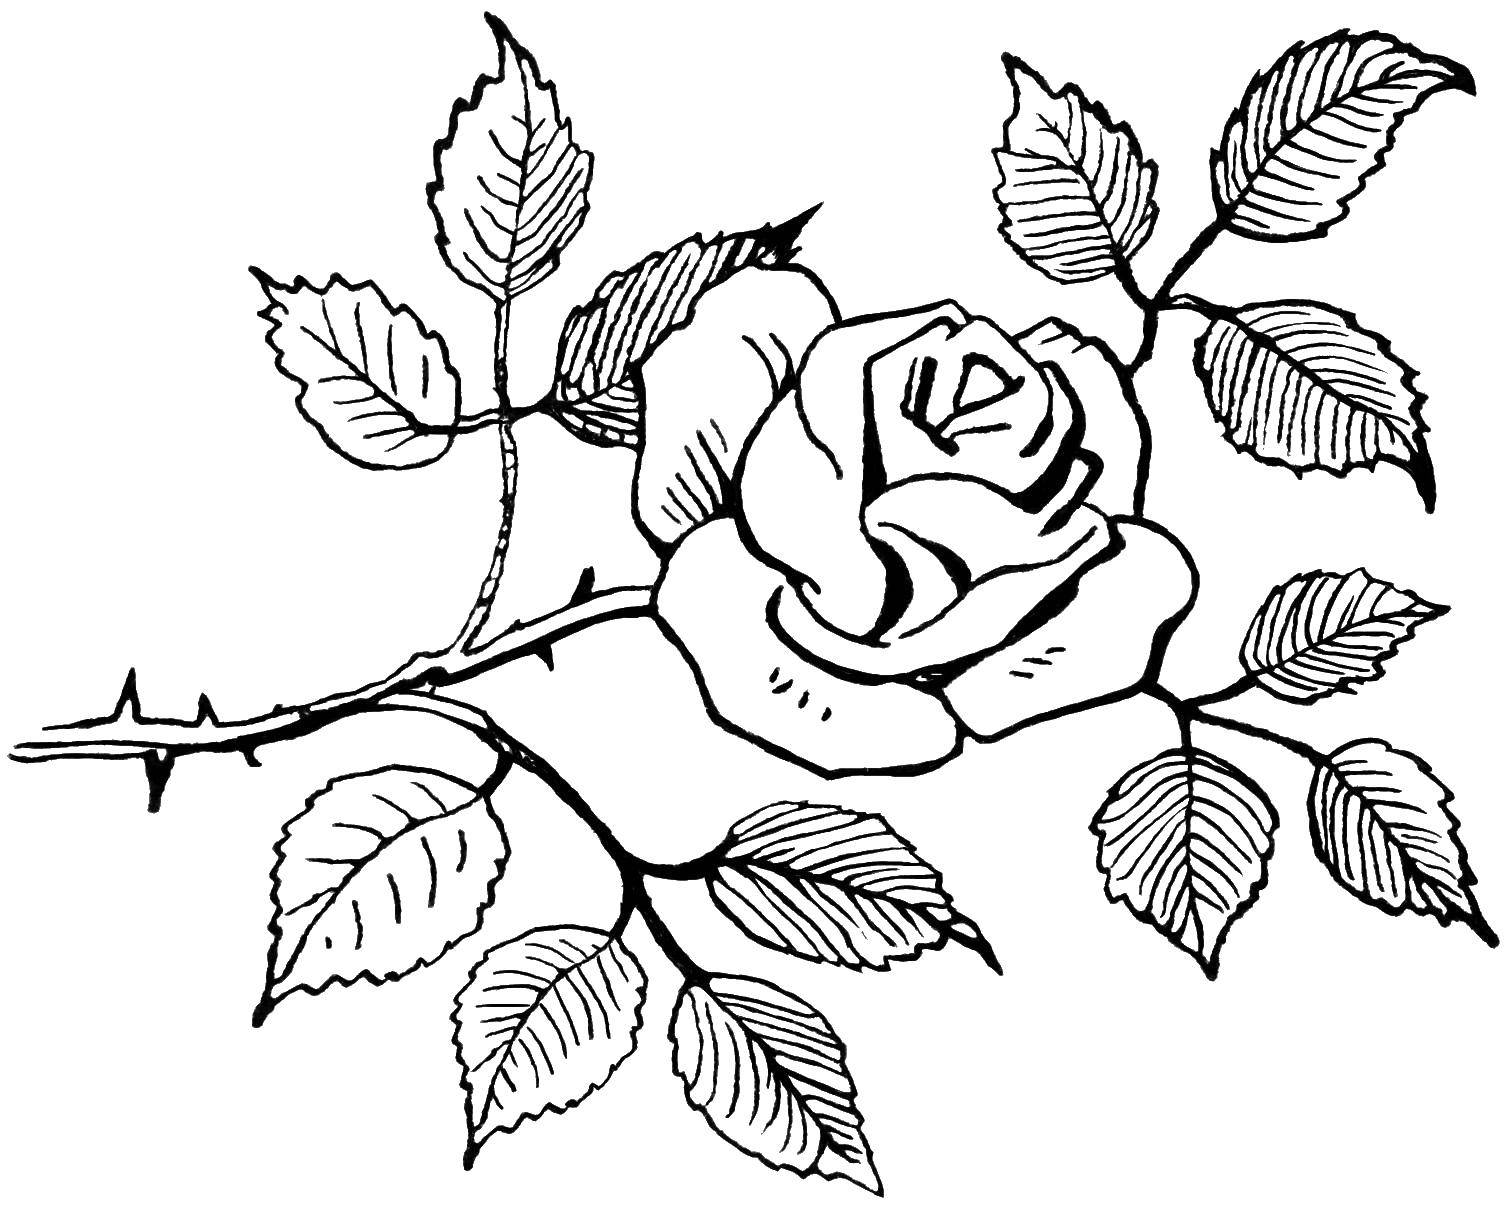 Coloring Rosebud. Category flowers. Tags:  Flowers, roses.